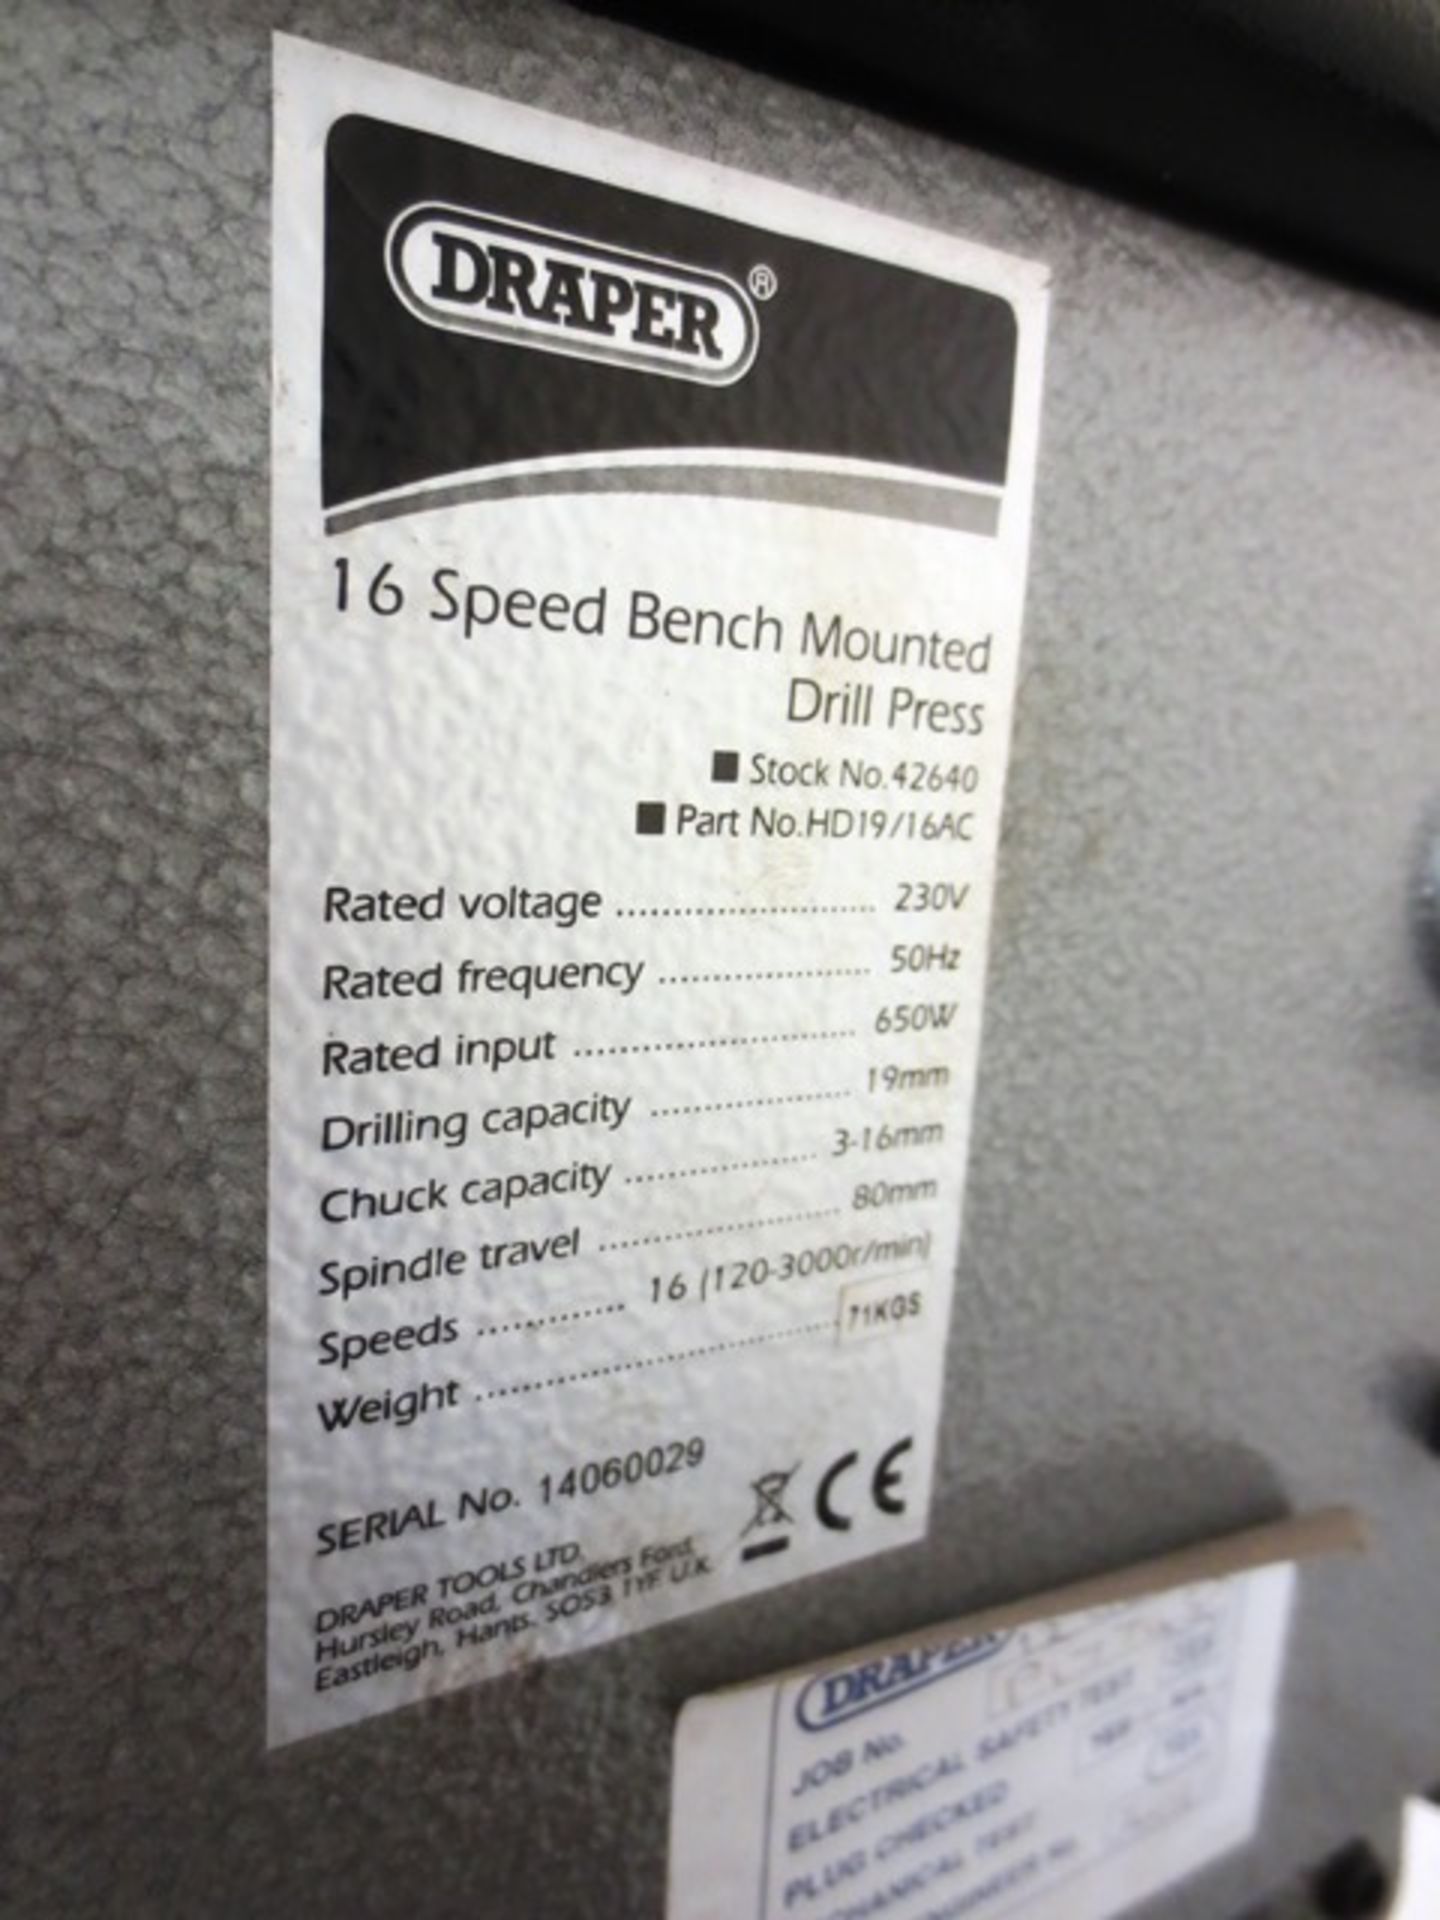 Draper 16 speed bench mounted drill, serial no: 14060029, rpm 120-3000 (240v) - Image 2 of 2